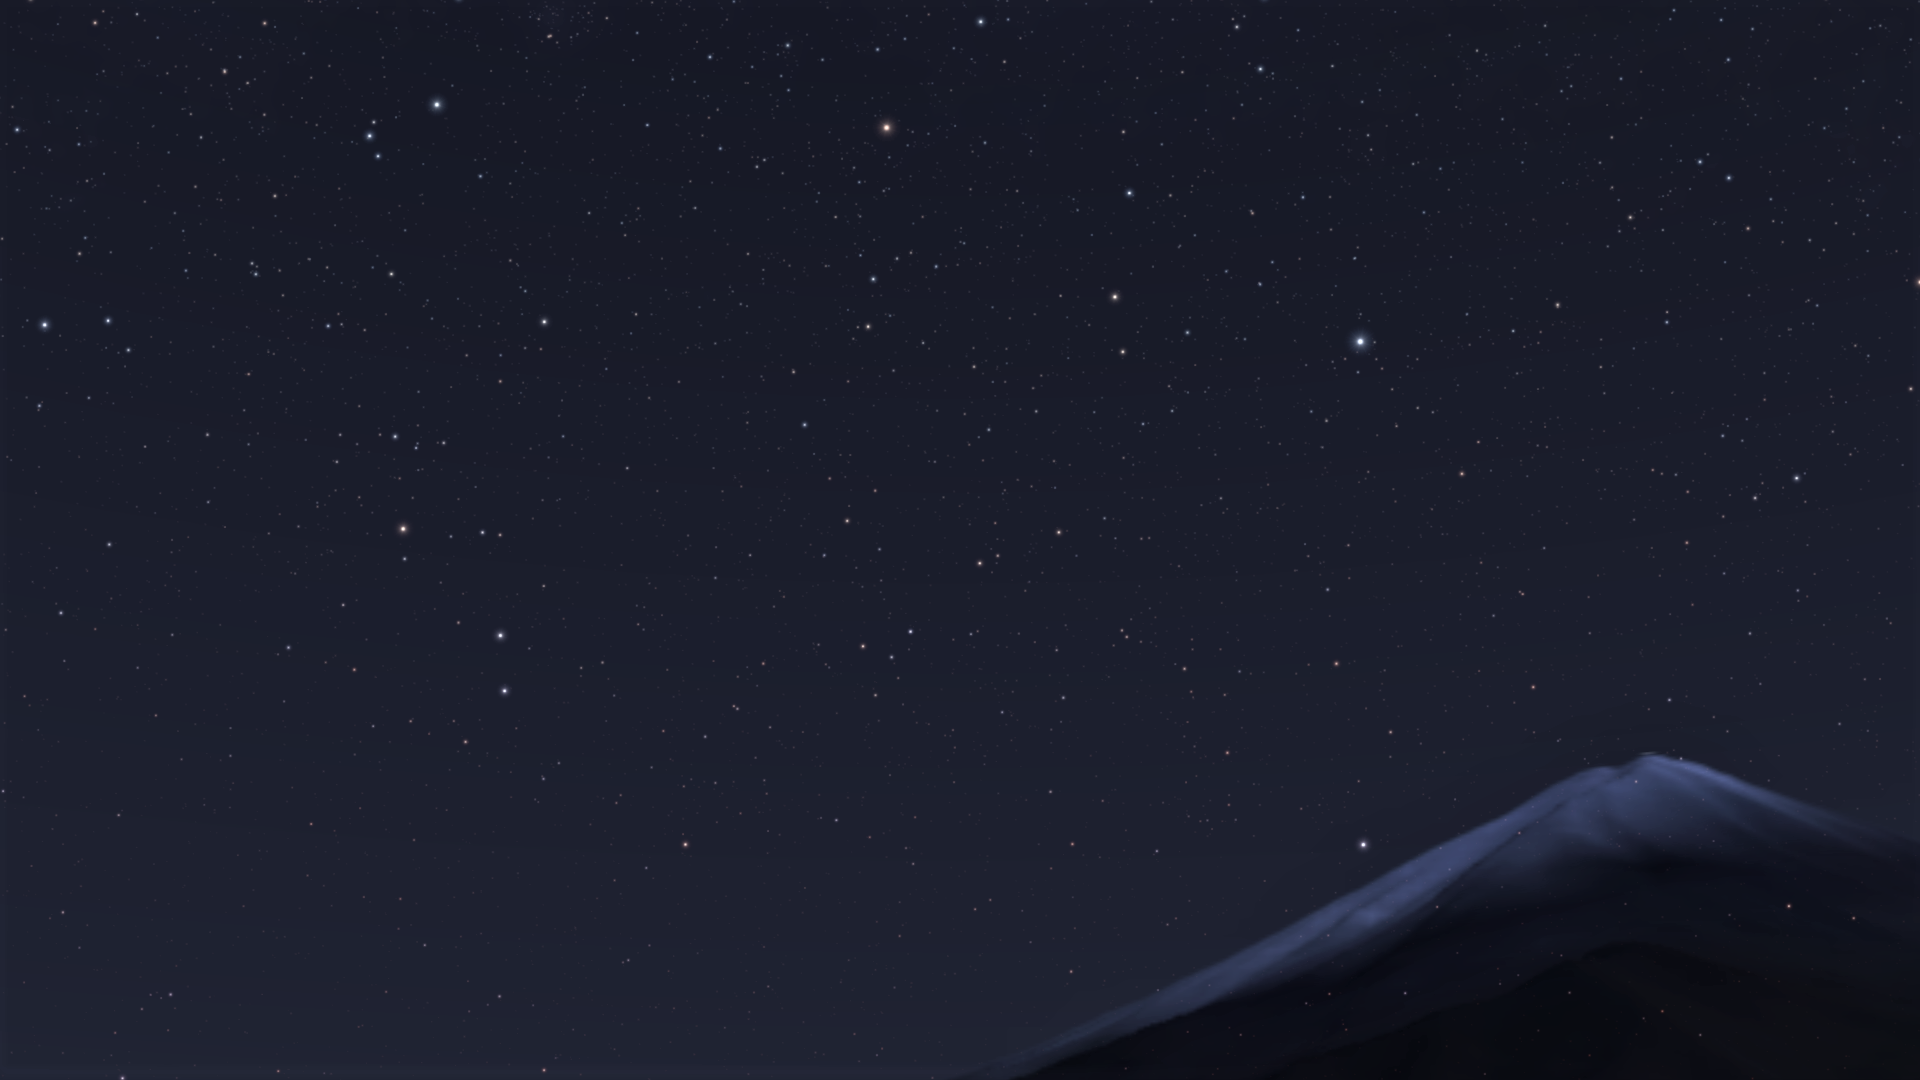 Mmd Starry Winds Effect Makes Amazing Night Time Scenes